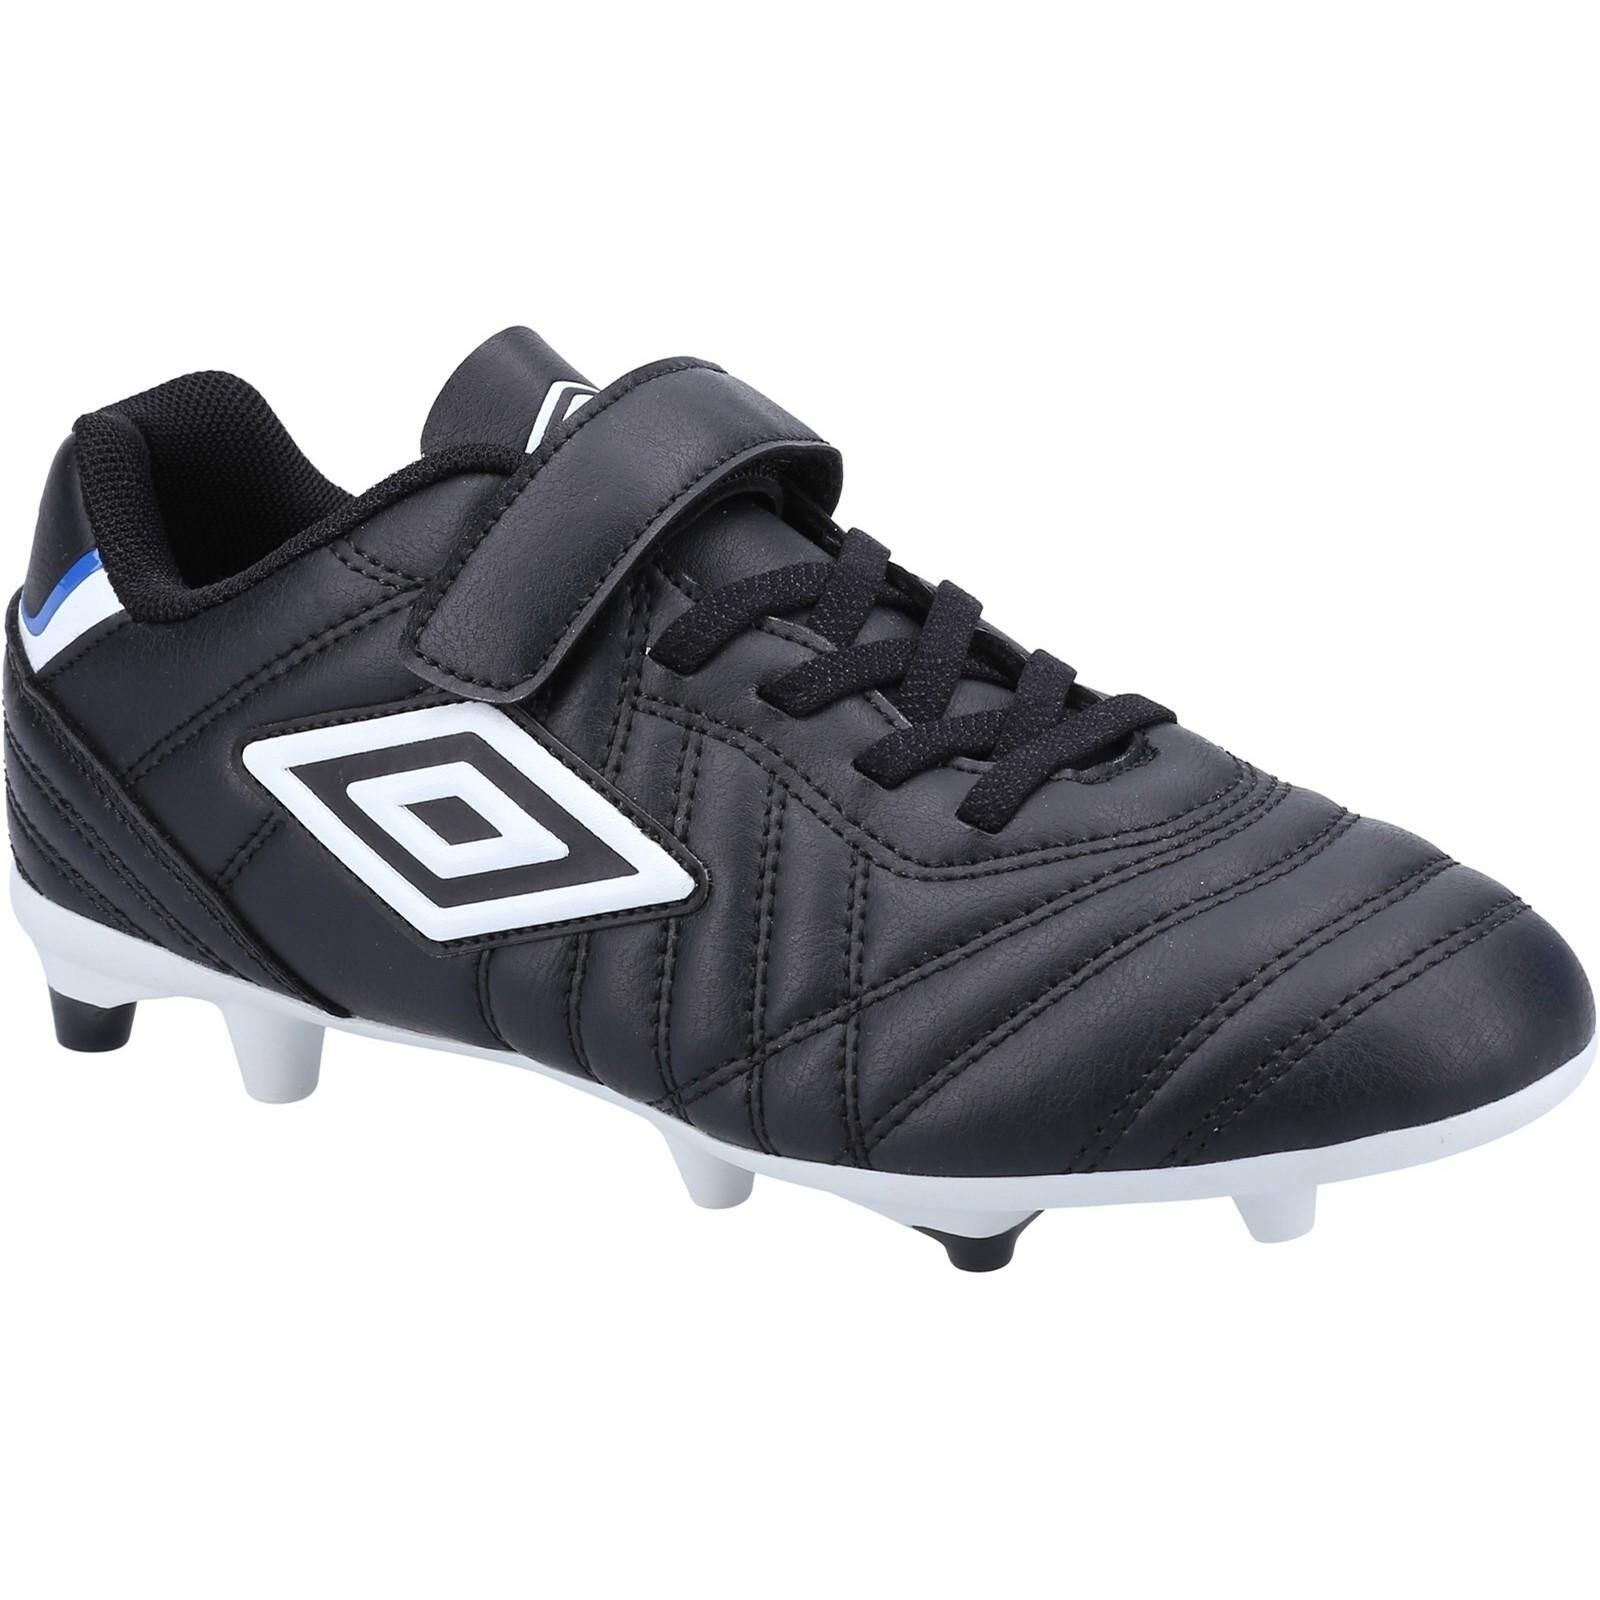 UMBRO Childrens/Kids Speciali Liga Firm Leather Football Boots (Black/White)